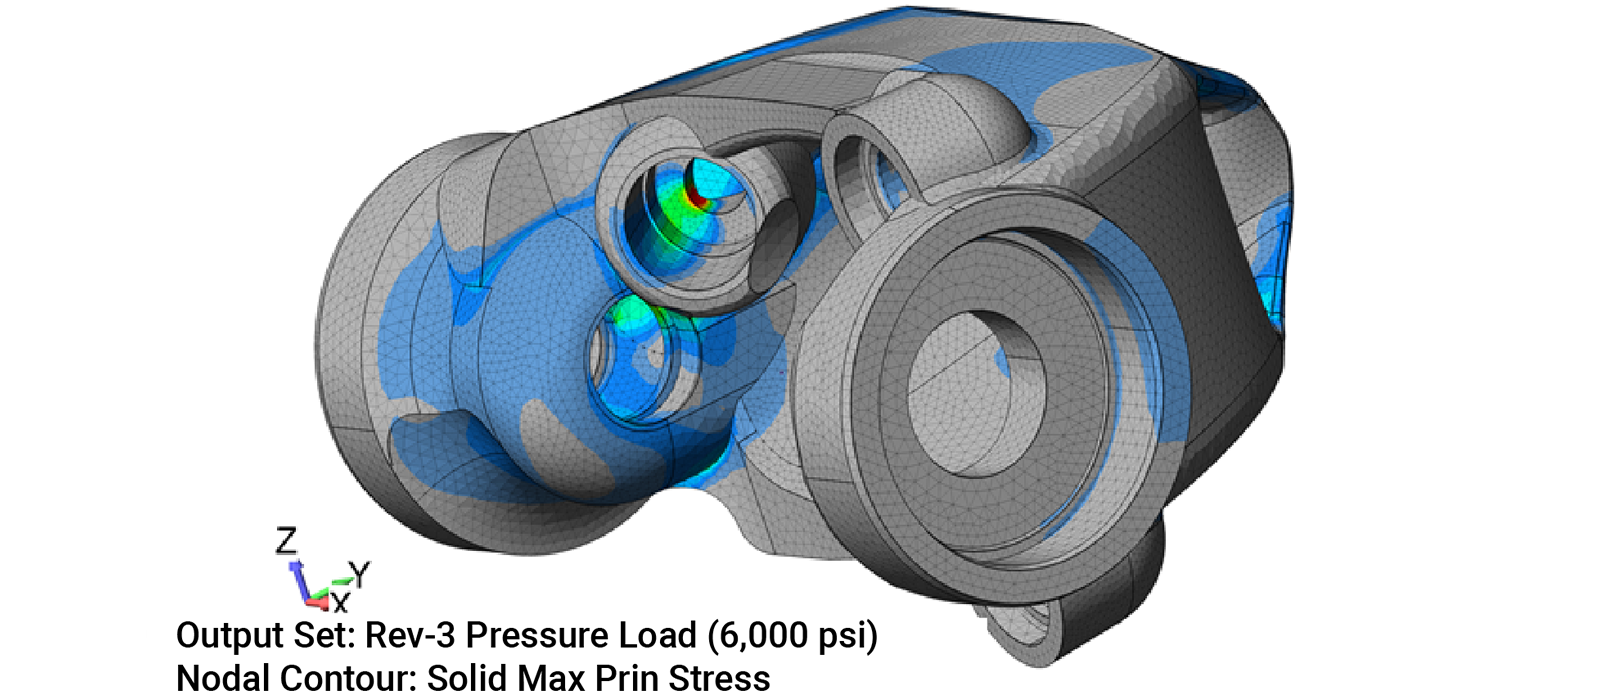 Starting with the same CAD geometry, a finite element analysis model was created to calculate stresses generated by the high-pressure hydraulic fluid. The combination of the CFD and FEA models facilitated a design that reduced pressure drop while keeping stresses below code allowables.